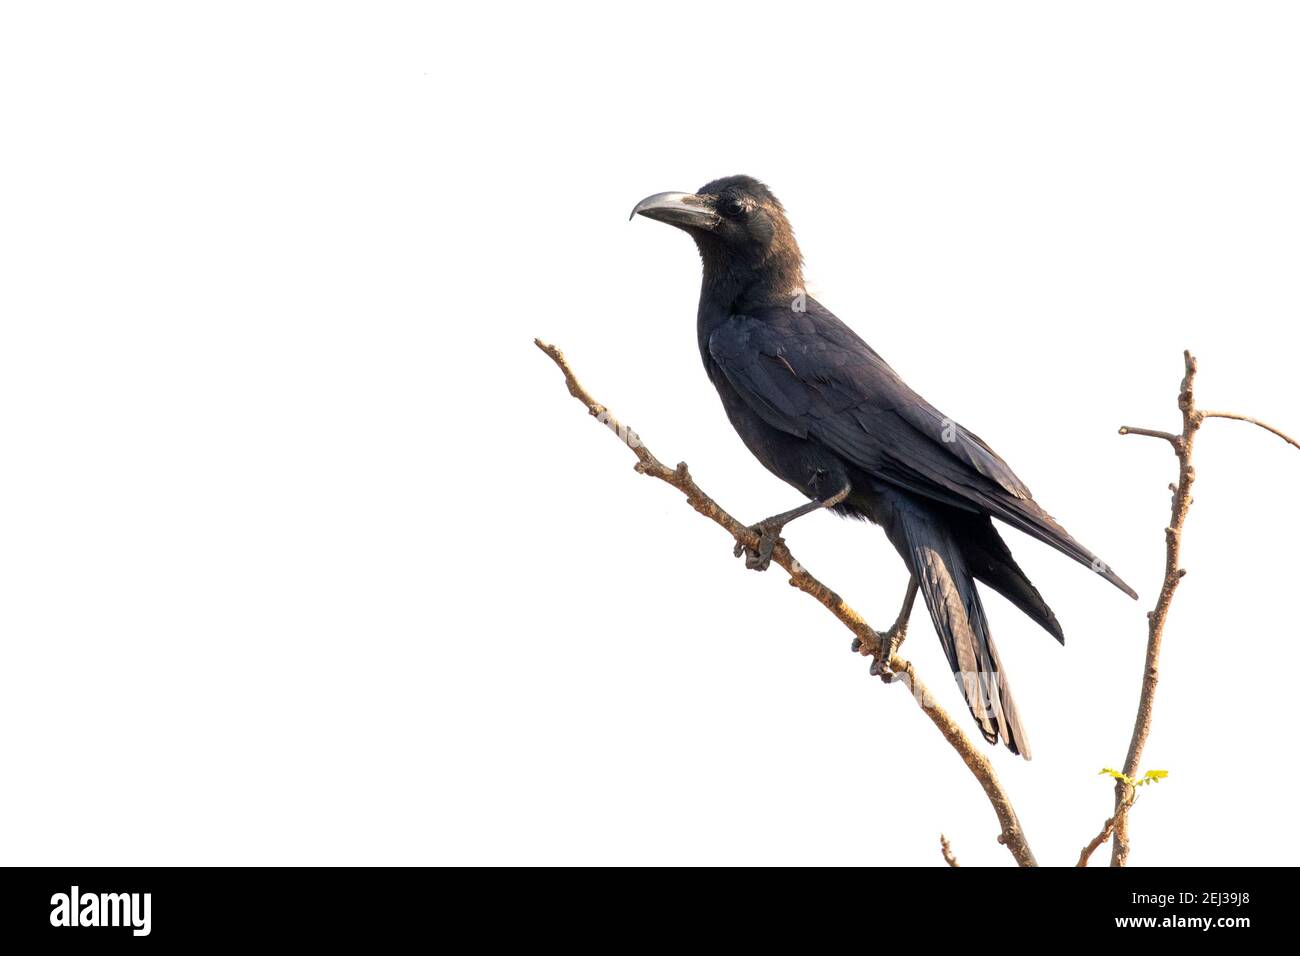 Image of crows on a branch isolated on white background. Birds. Wild Animals. Stock Photo